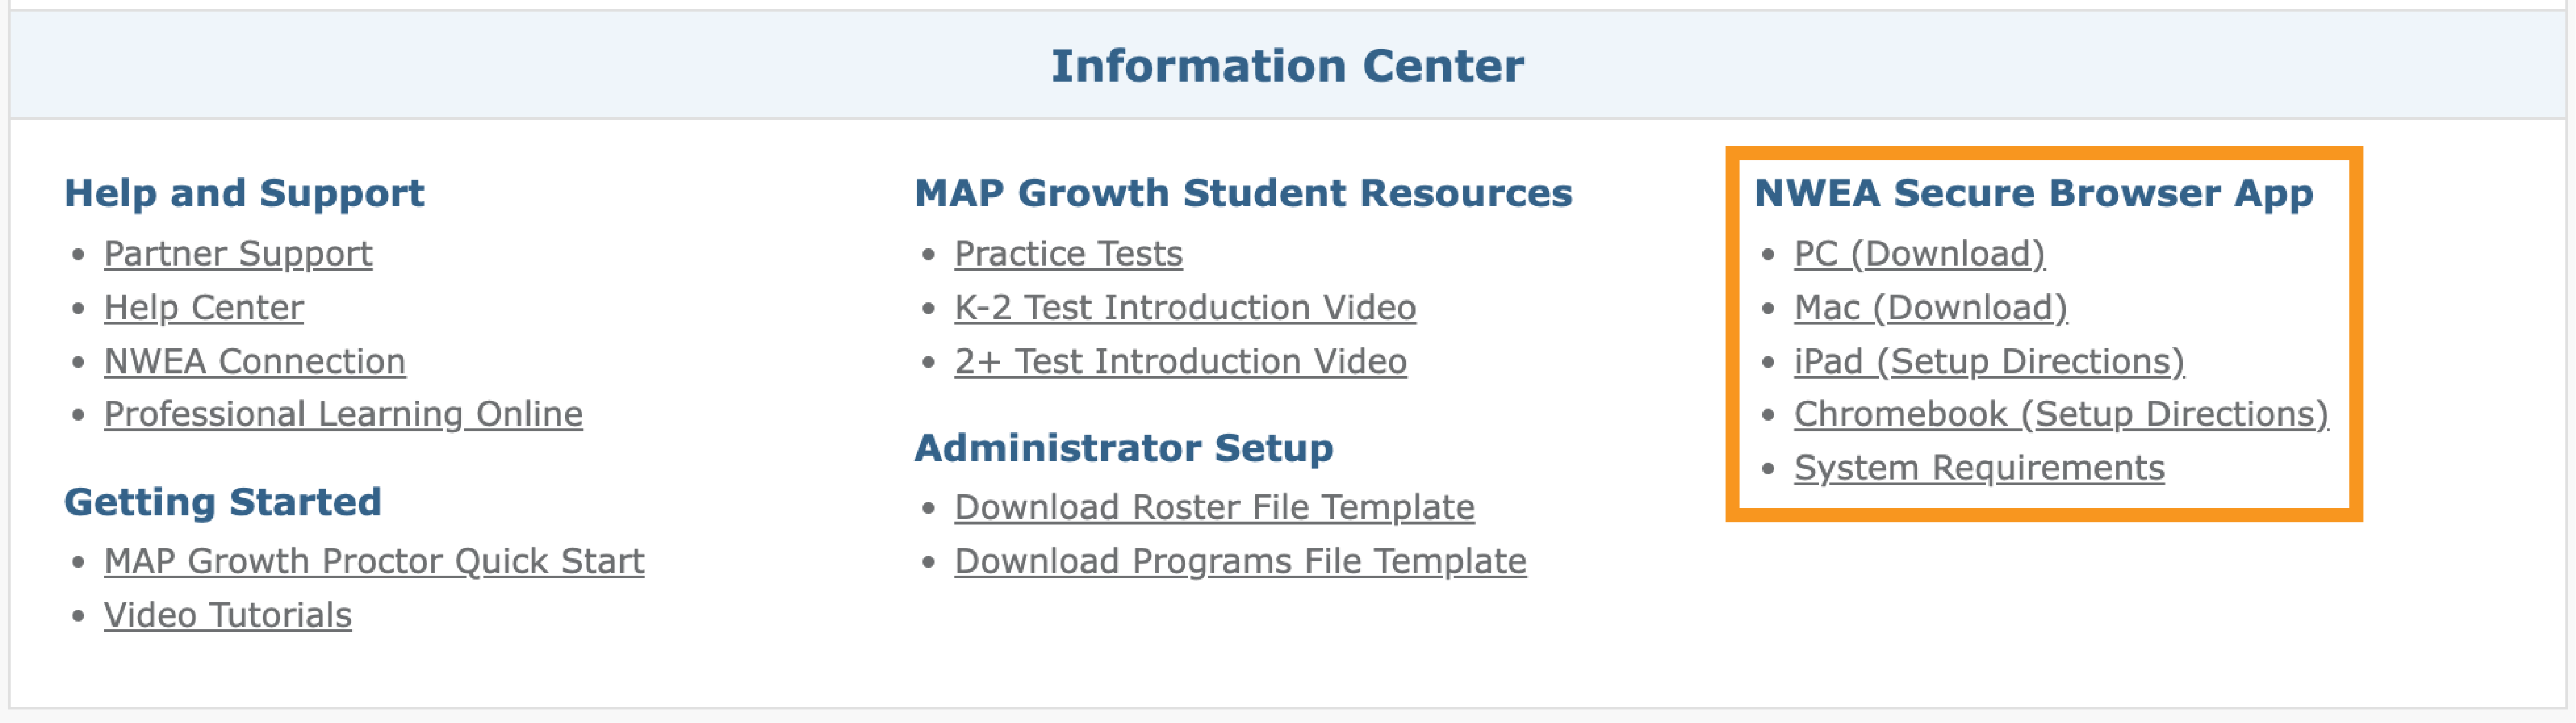 The MAP Growth Information Center, highlighting the links under NWEA Secure Browser App